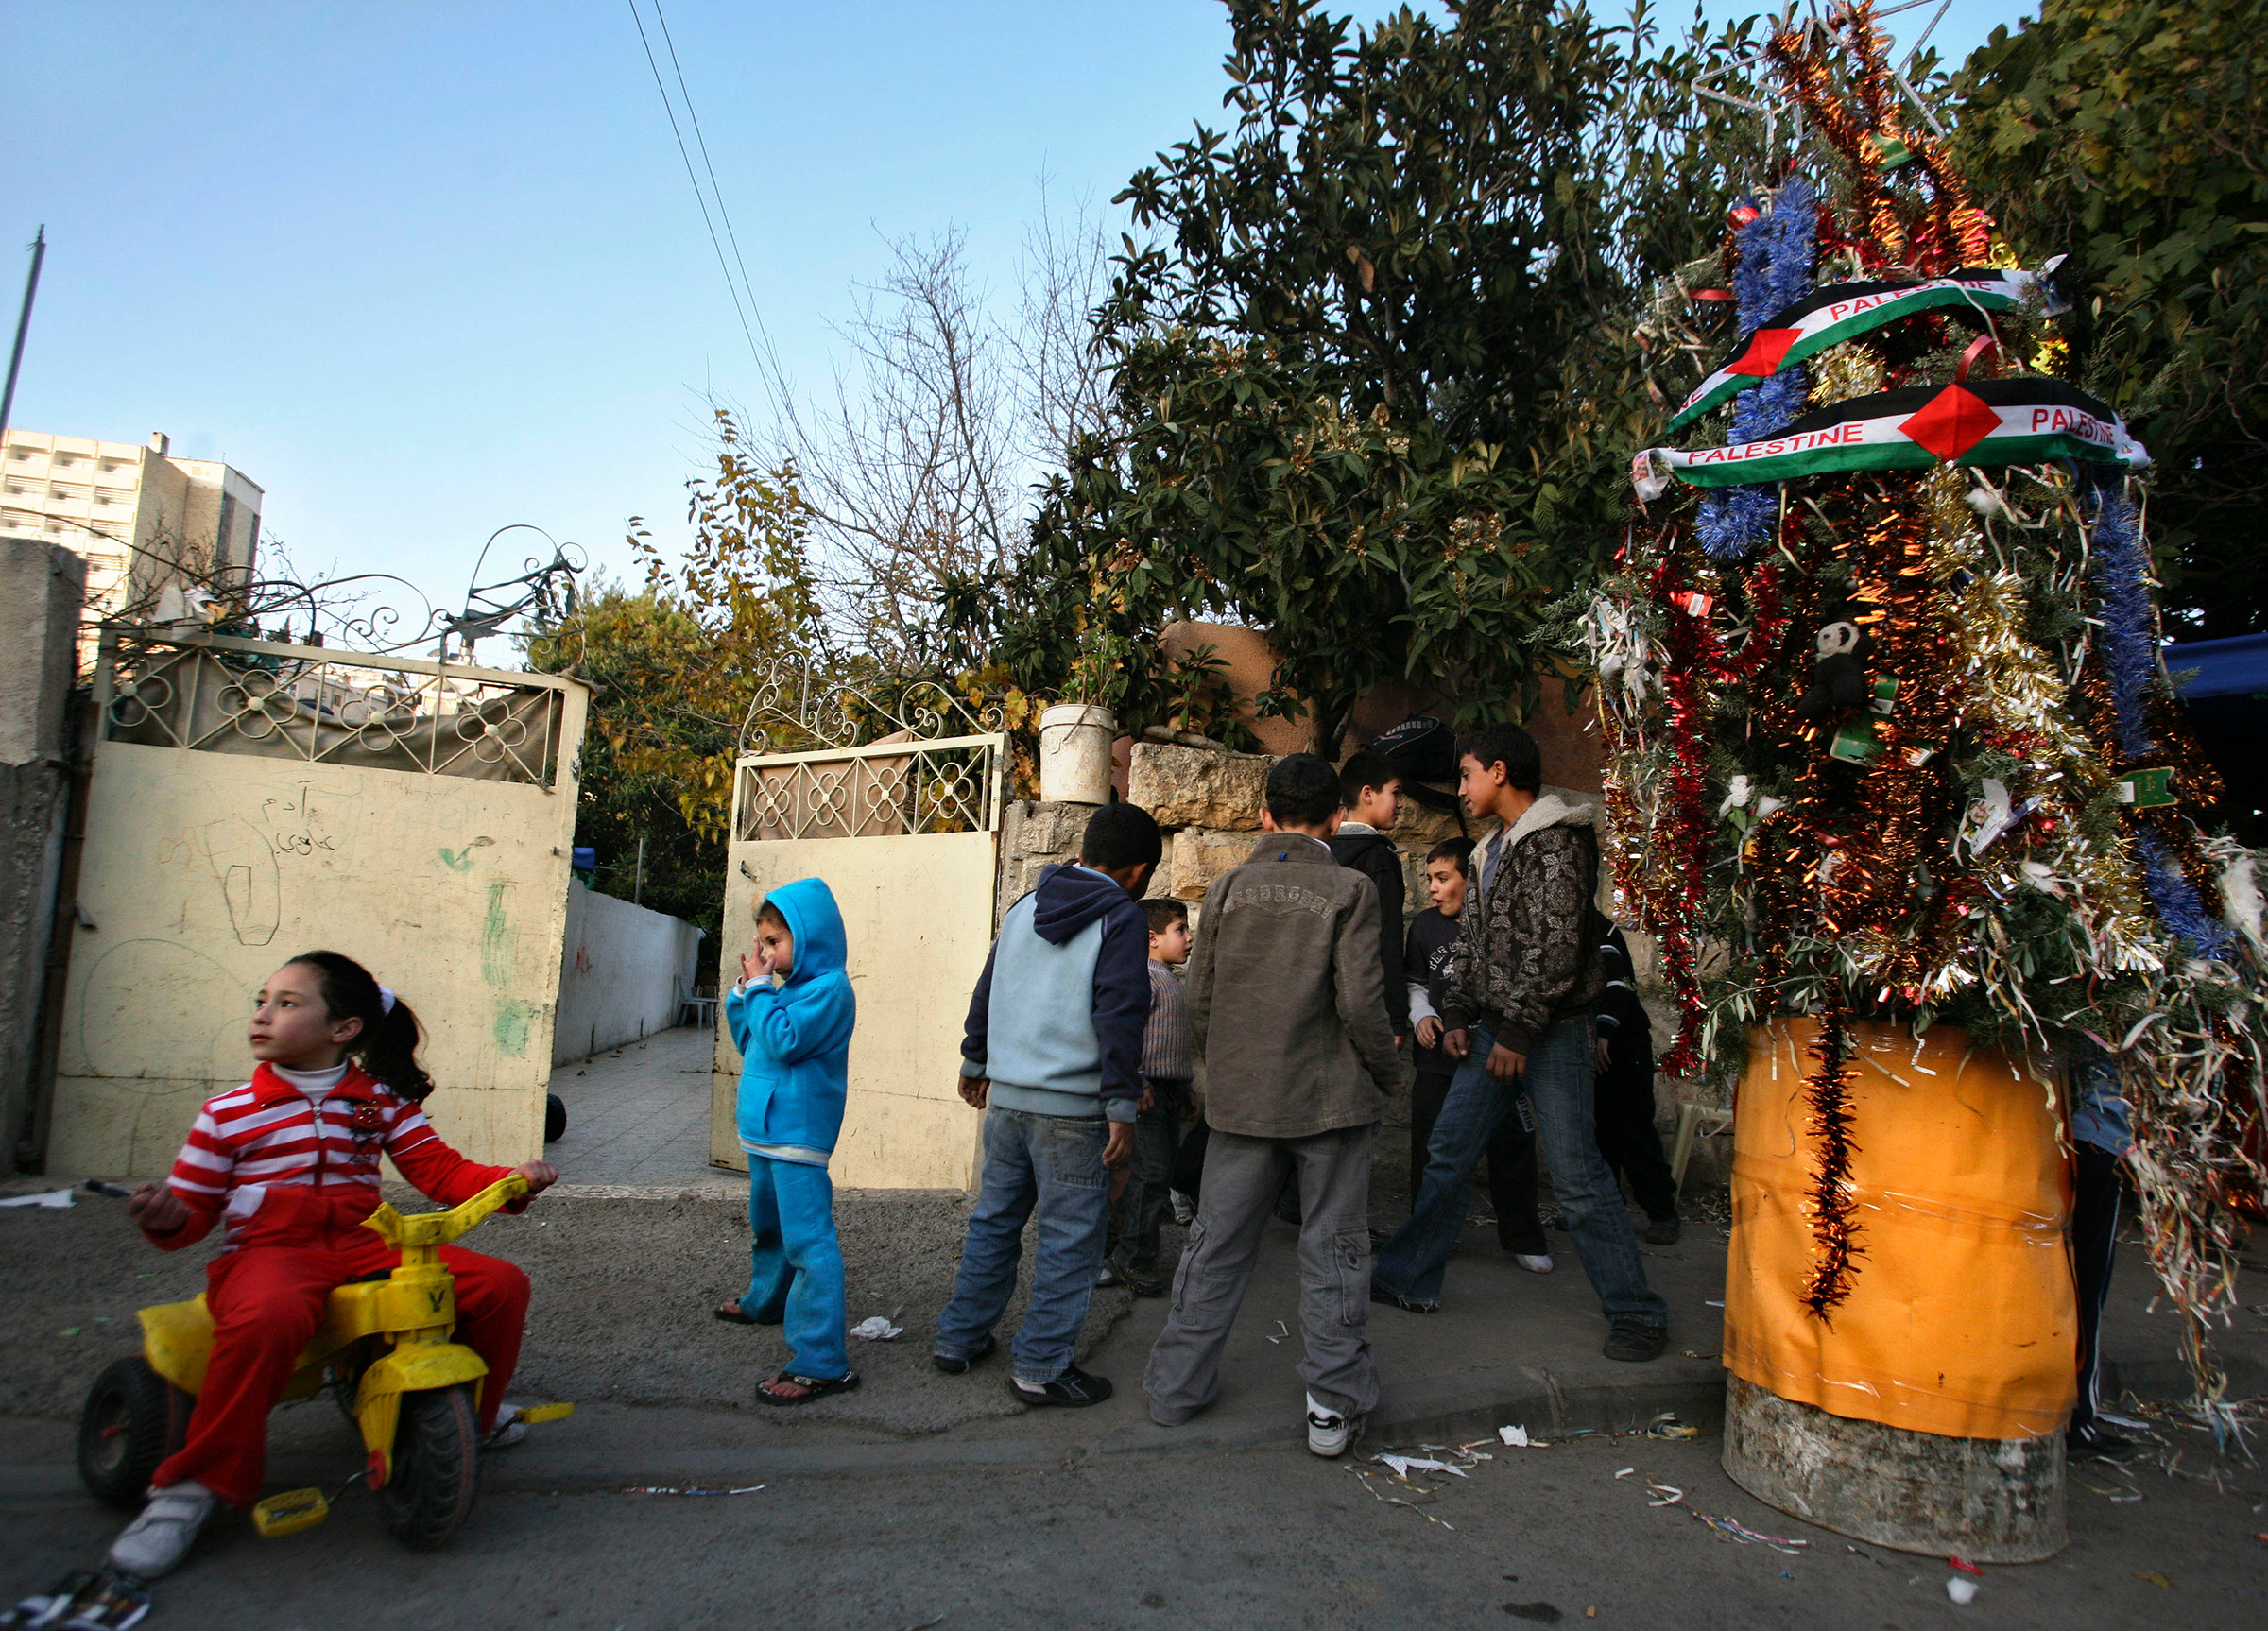 Palestinian children gather around a Christmas Tree during a ceremony in the East Jerusalem neighborhood of Sheikh Jarrah on Dec. 23, 2009. (Dan Balilty—AP)